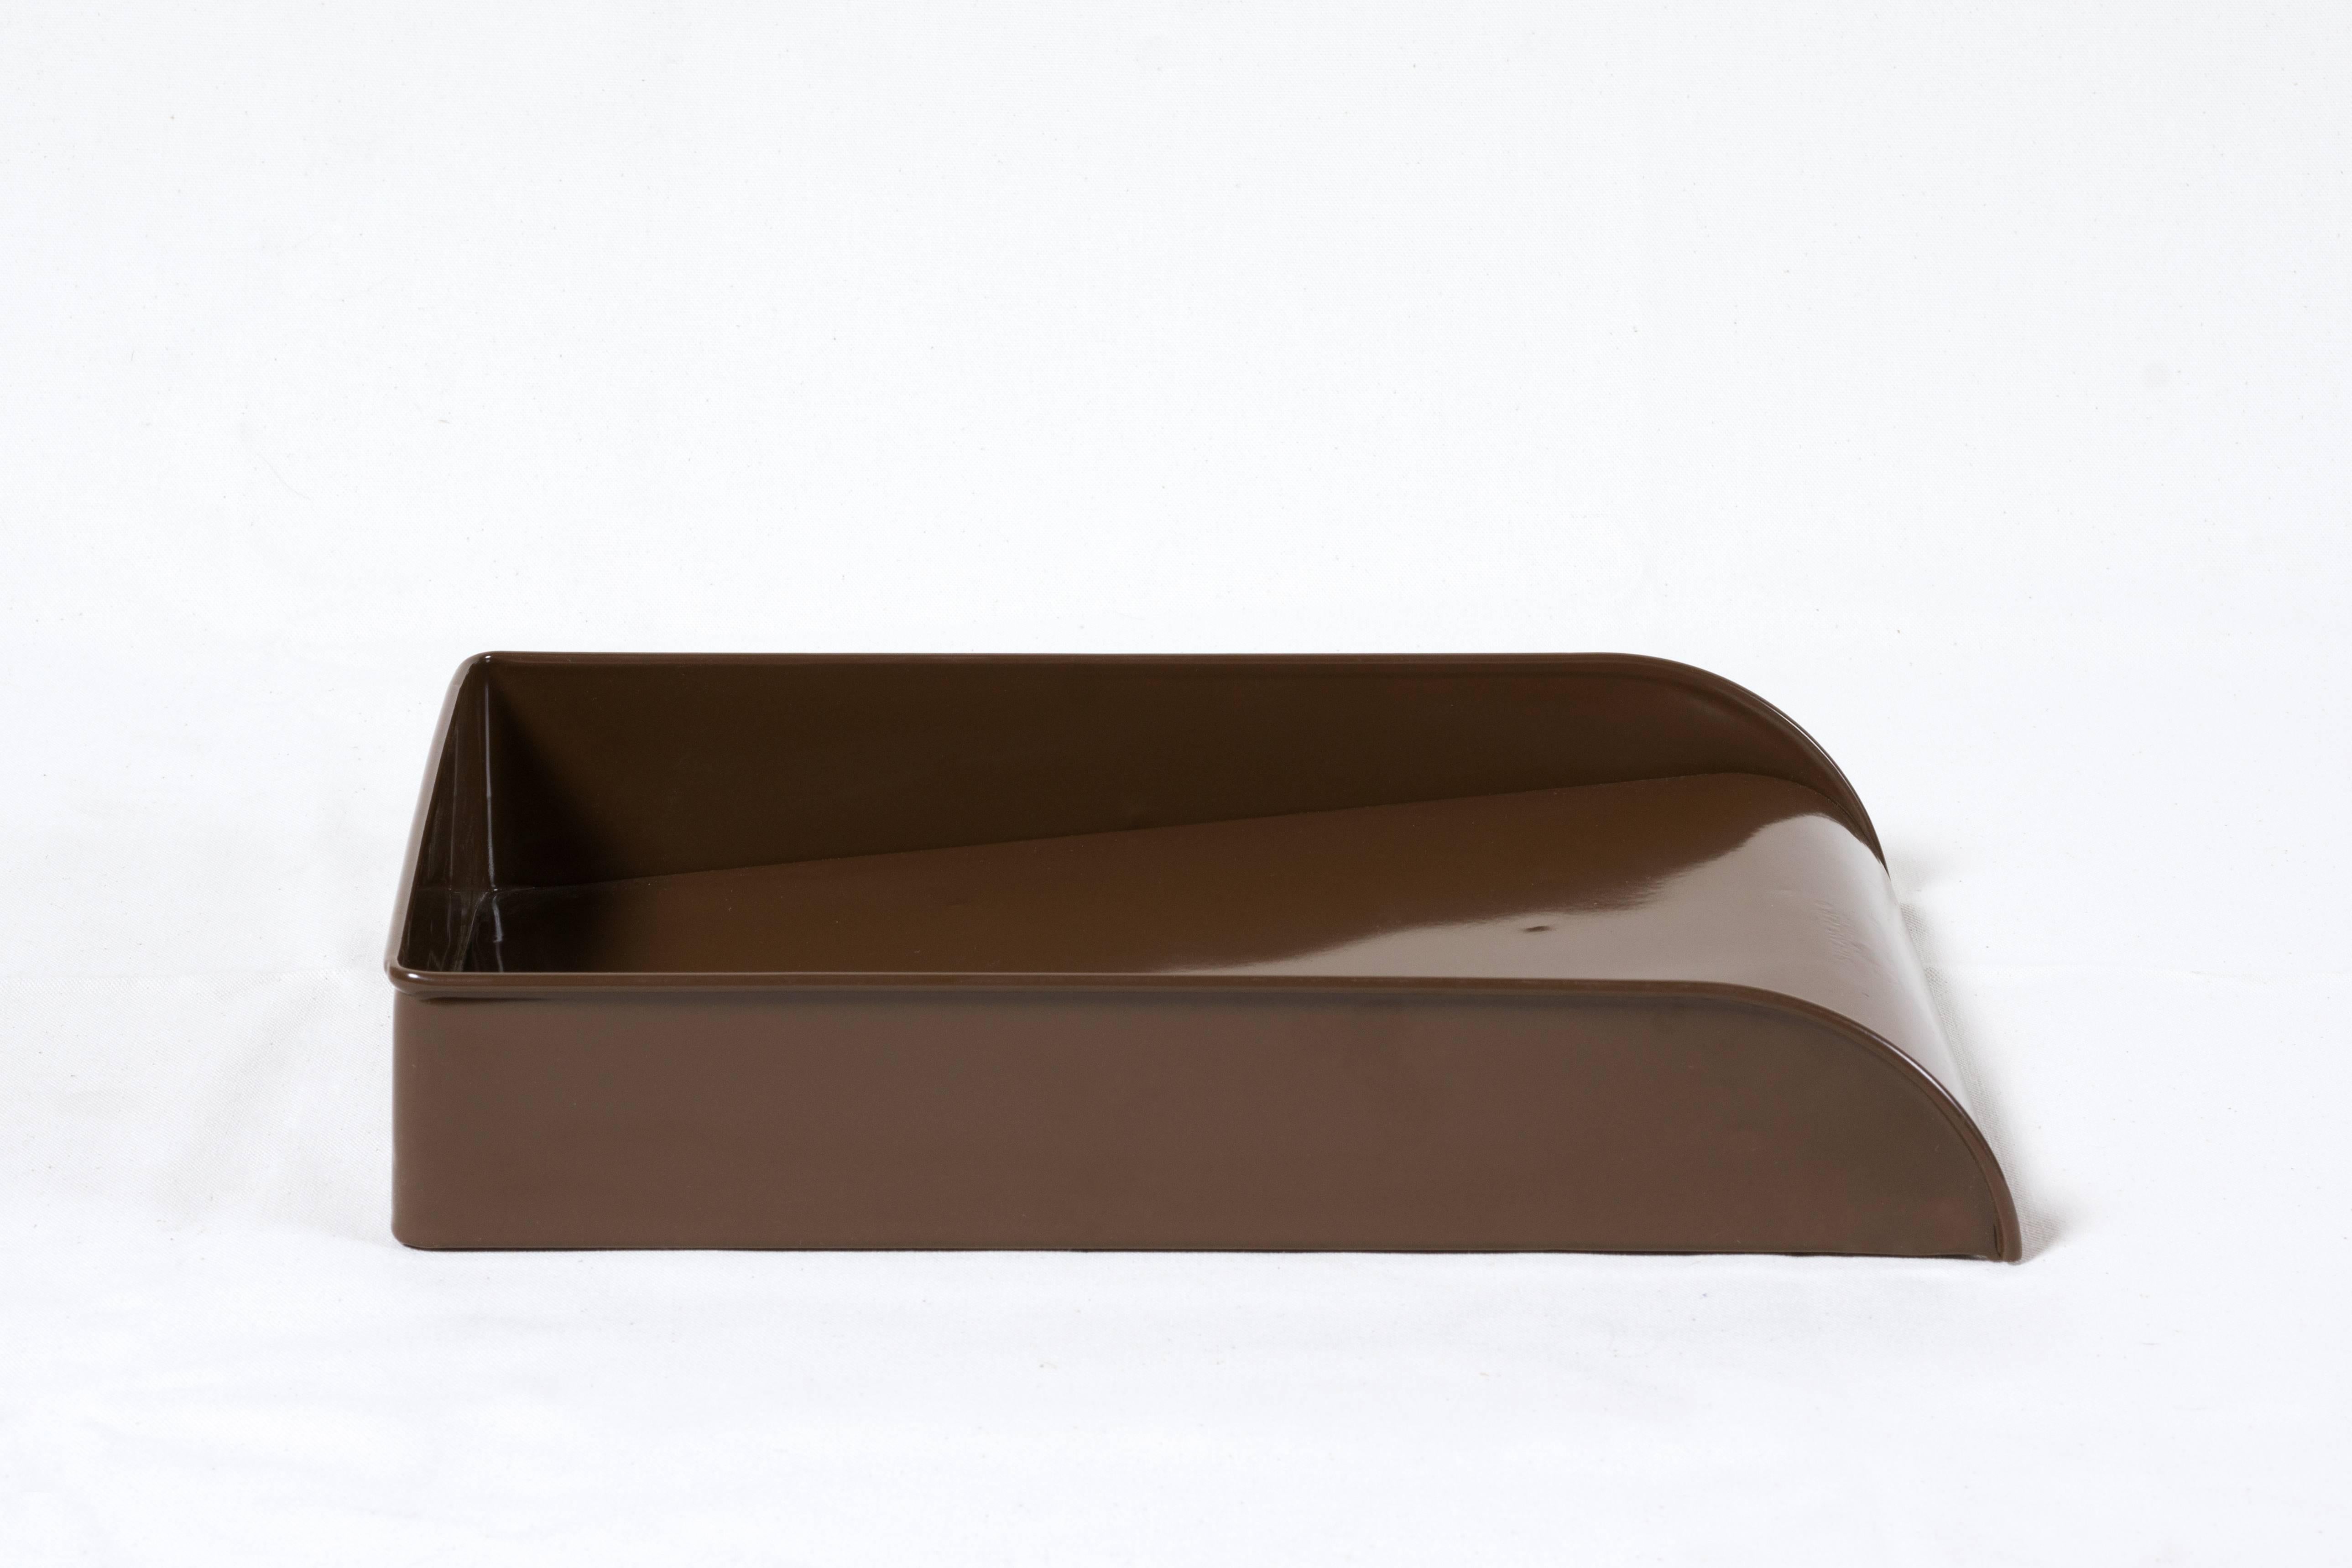 Vintage Art Deco office letter, memo or mail tray powder-coated in Classic brown. This uniquely finished organizational piece is sure to keep your retro office in tip-top shape. 

Dimensions: 15